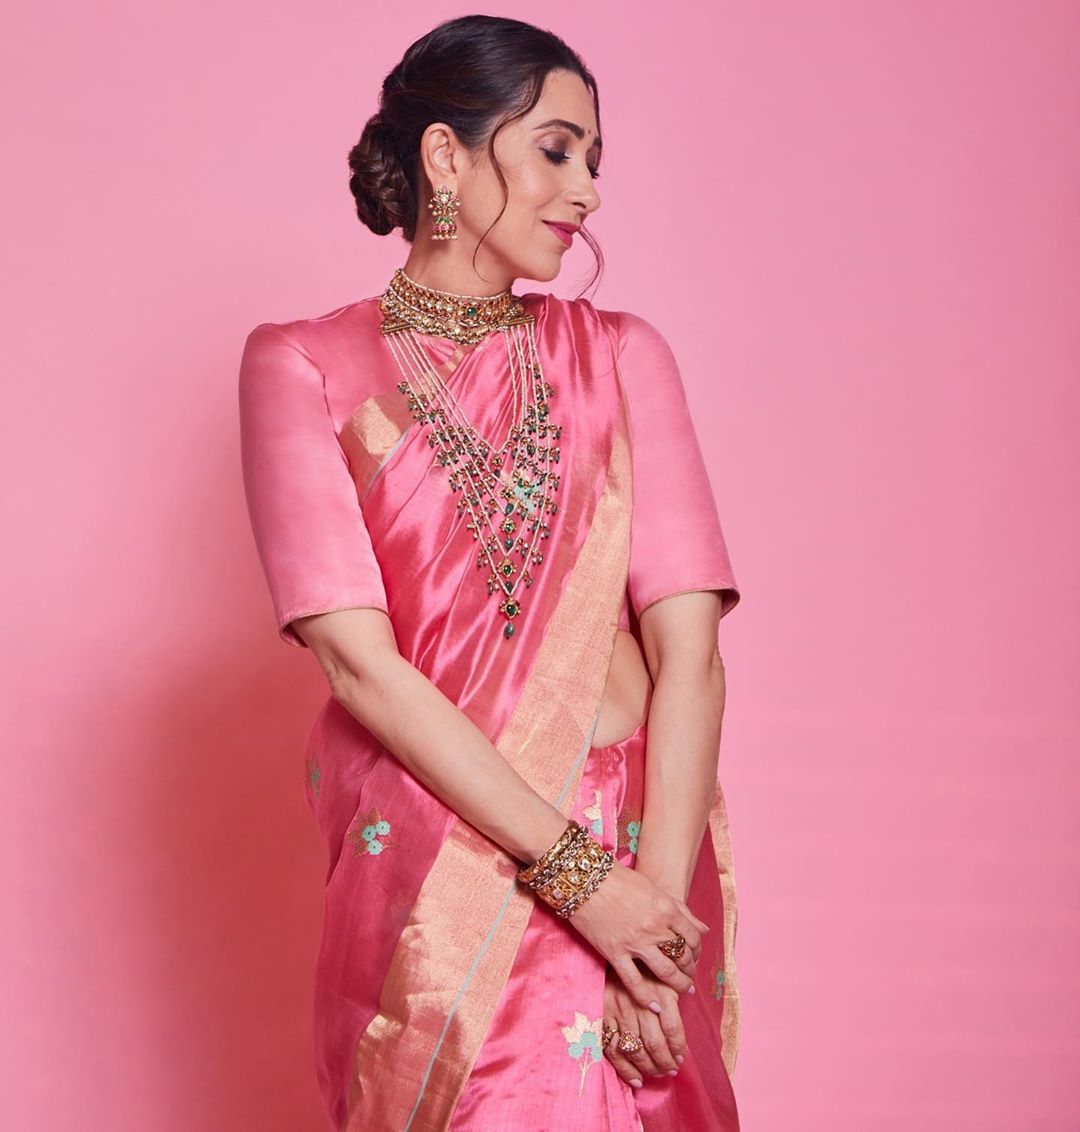 Sari-blouse pairing trends inspired by Bollywood celebrities